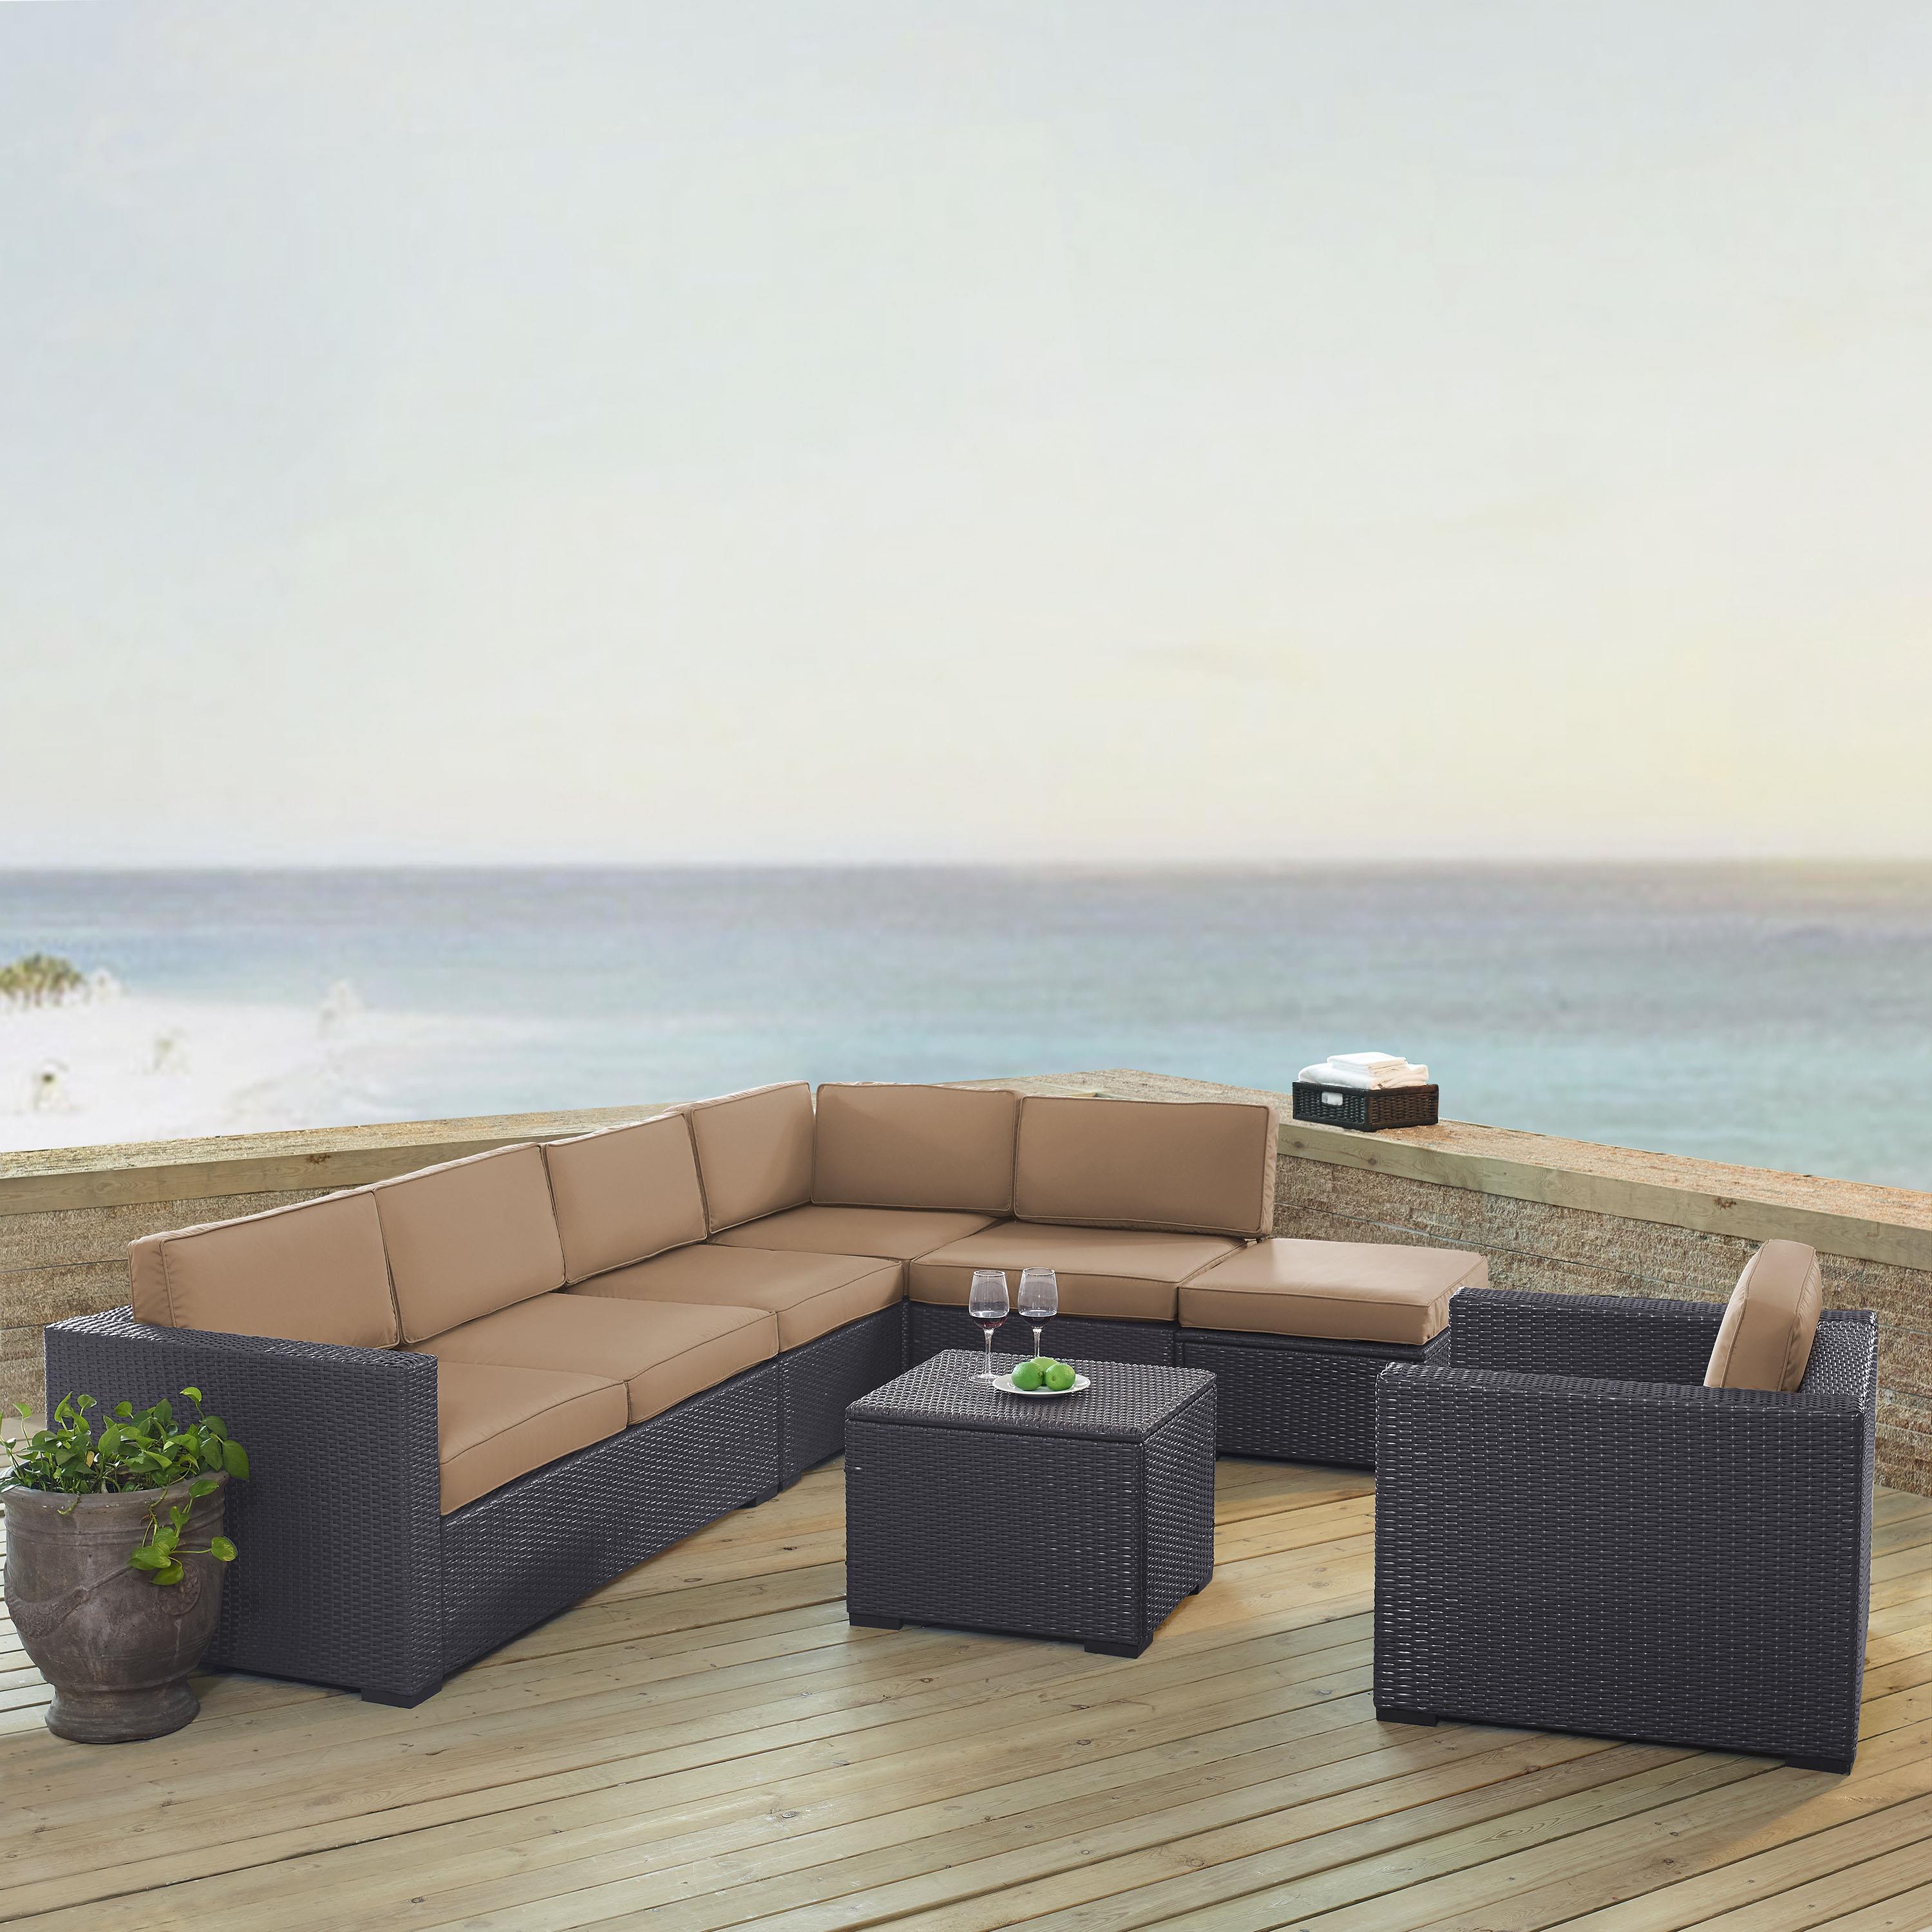 Biscayne 7 Person Outdoor Wicker Seating Set In Mocha - Two Loveseats, One Armless Chair, One Arm Chair, Coffee Table, Ottoman - image 4 of 4